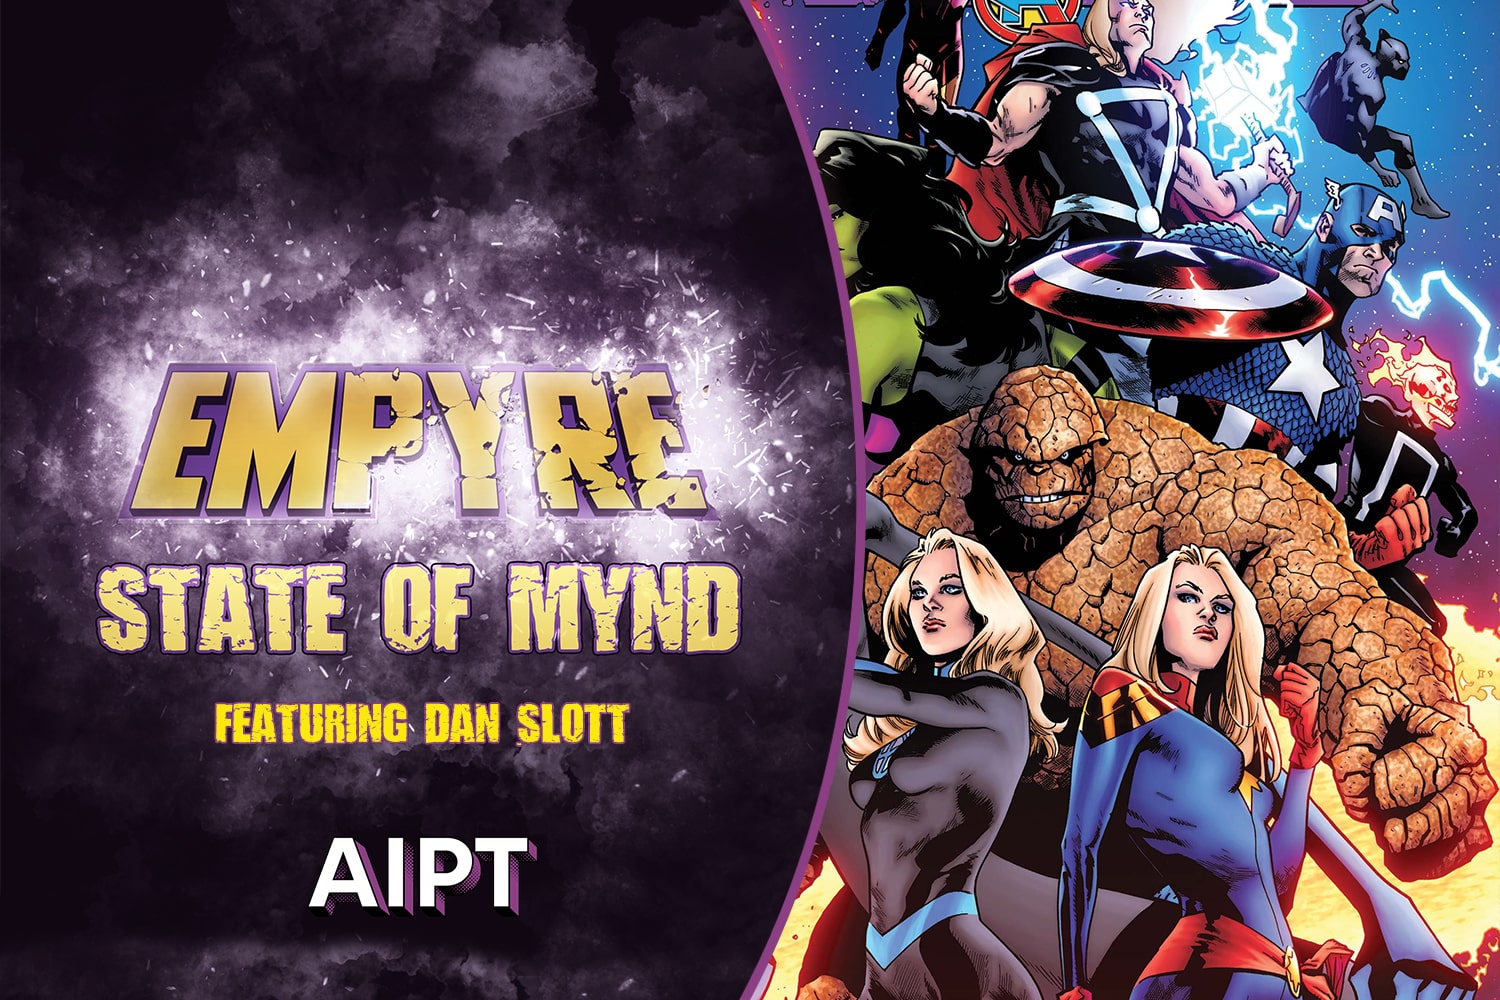 Empyre State of Mynd #5: Dan Slott answers your questions